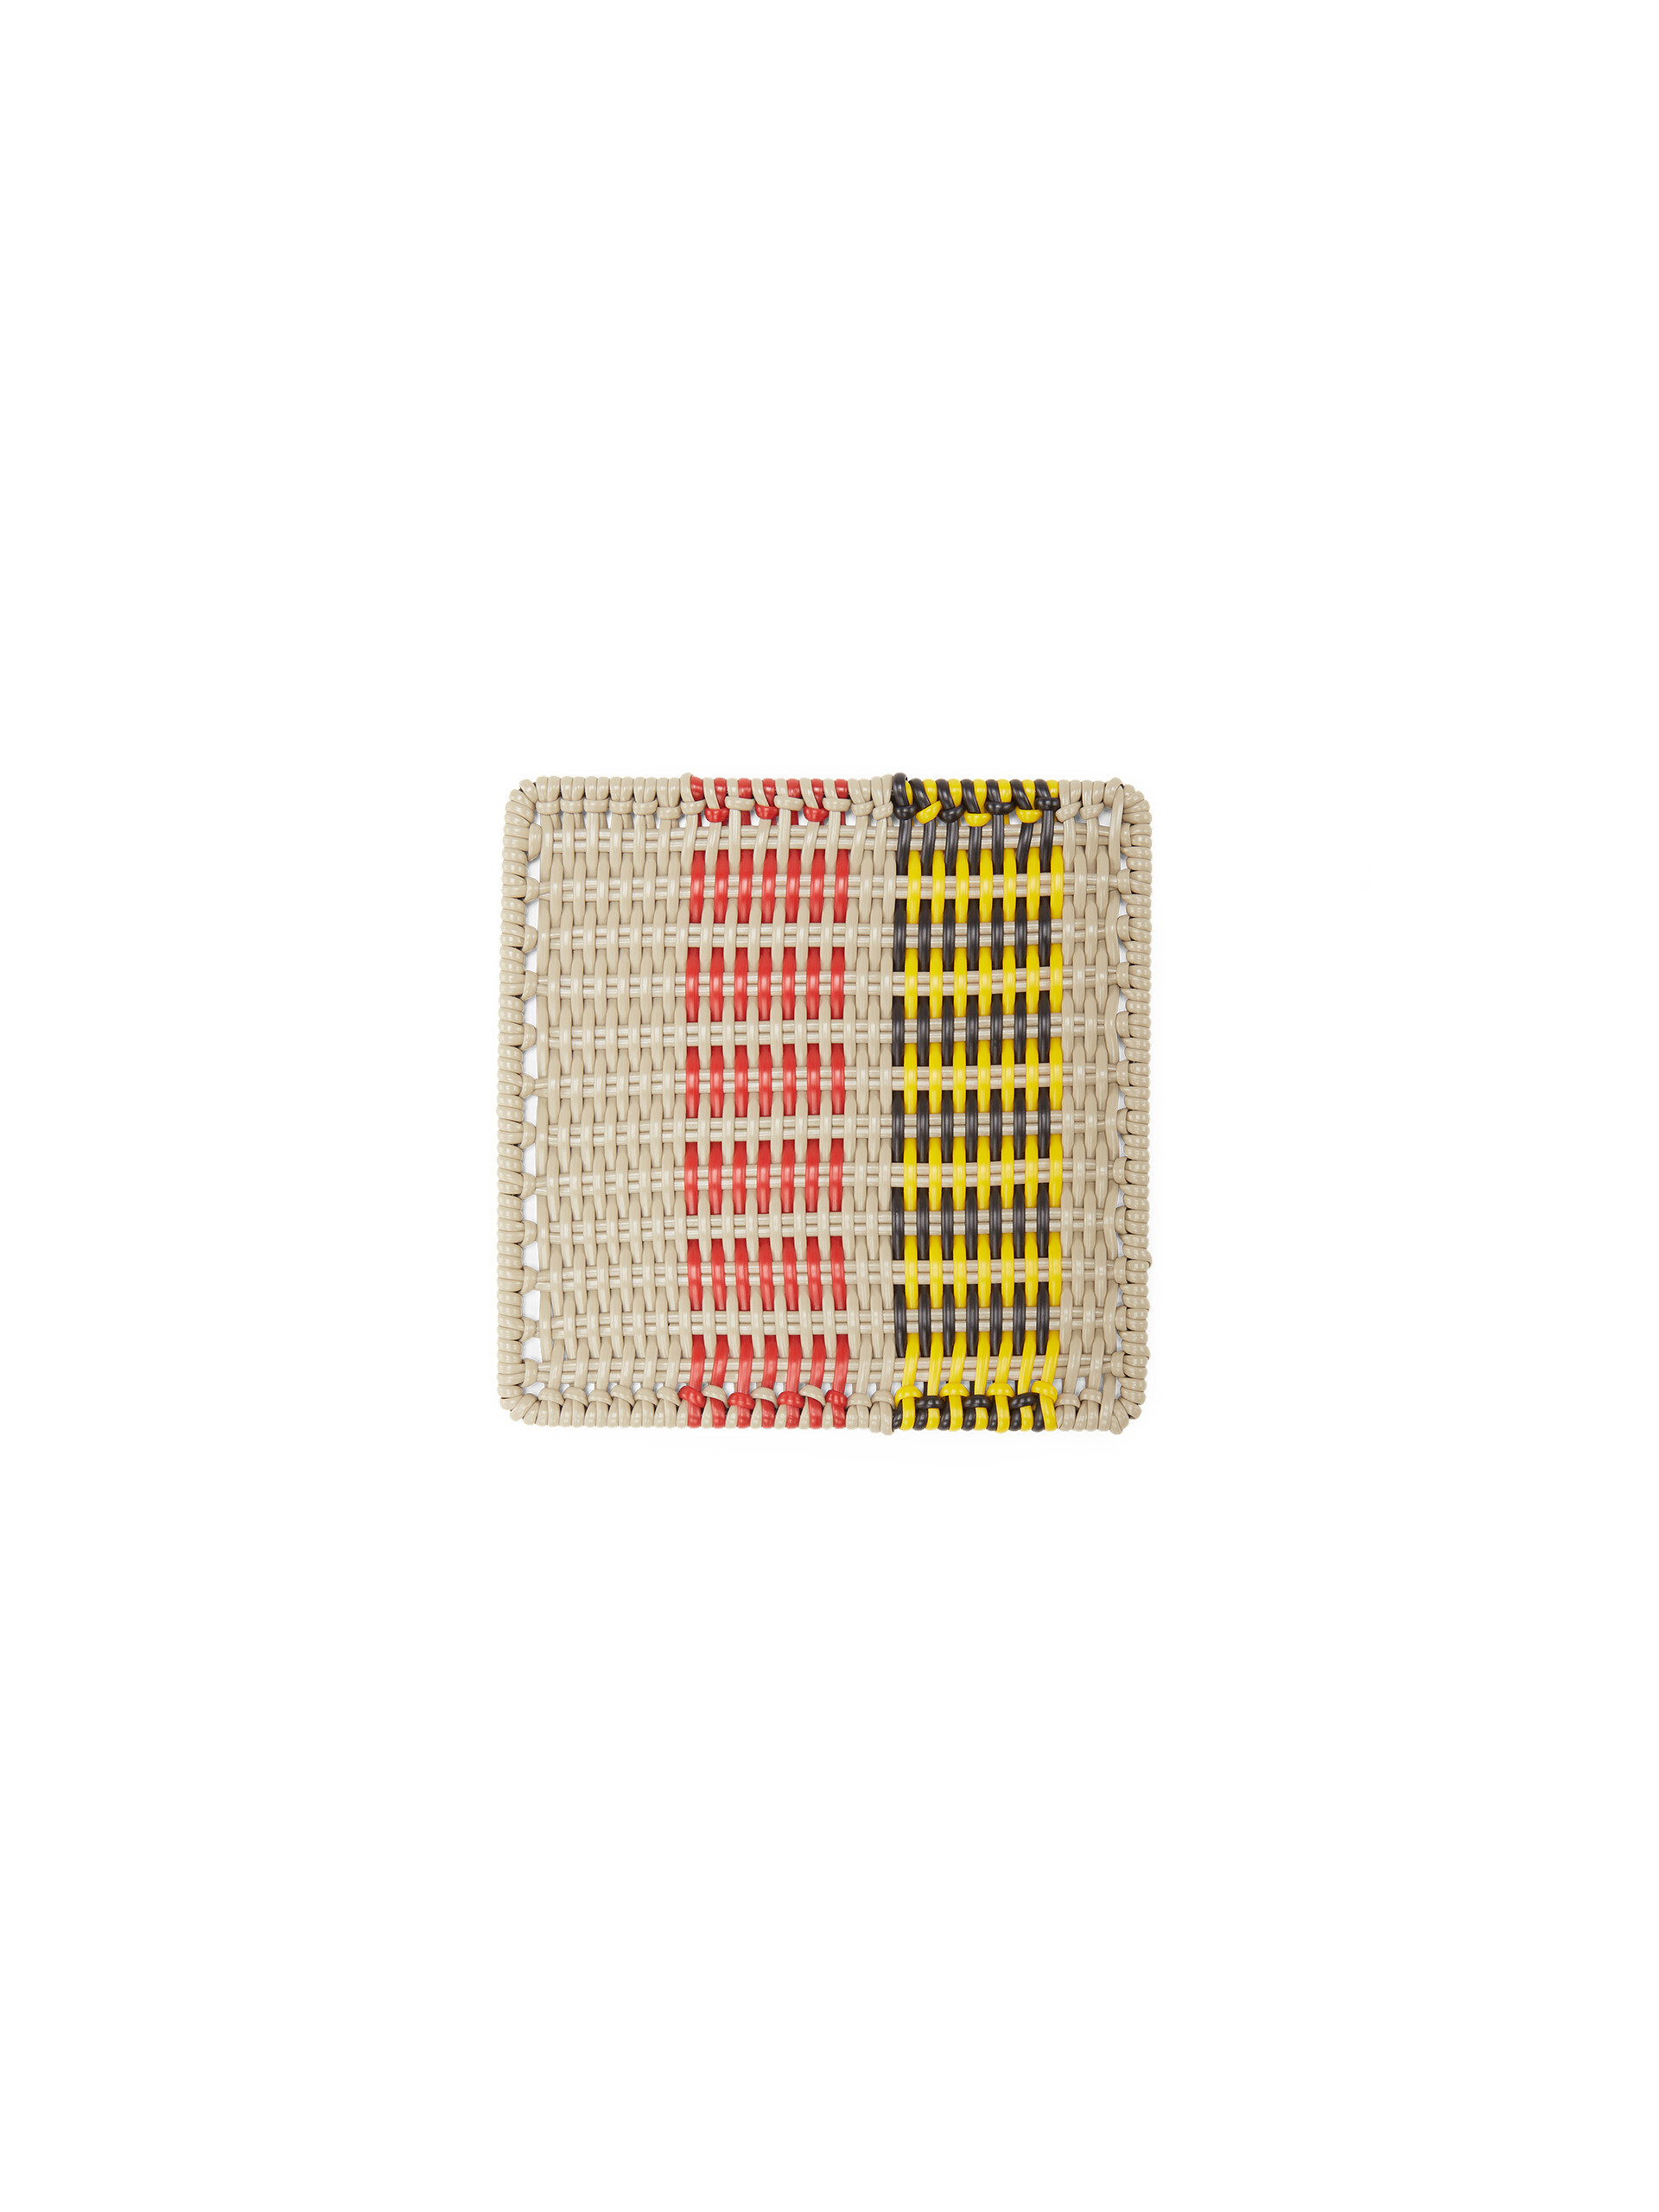 MARNI MARKET square mat with striped motif in iron and yellow, black, red and beige woven PVC - Home Accessories - Image 2